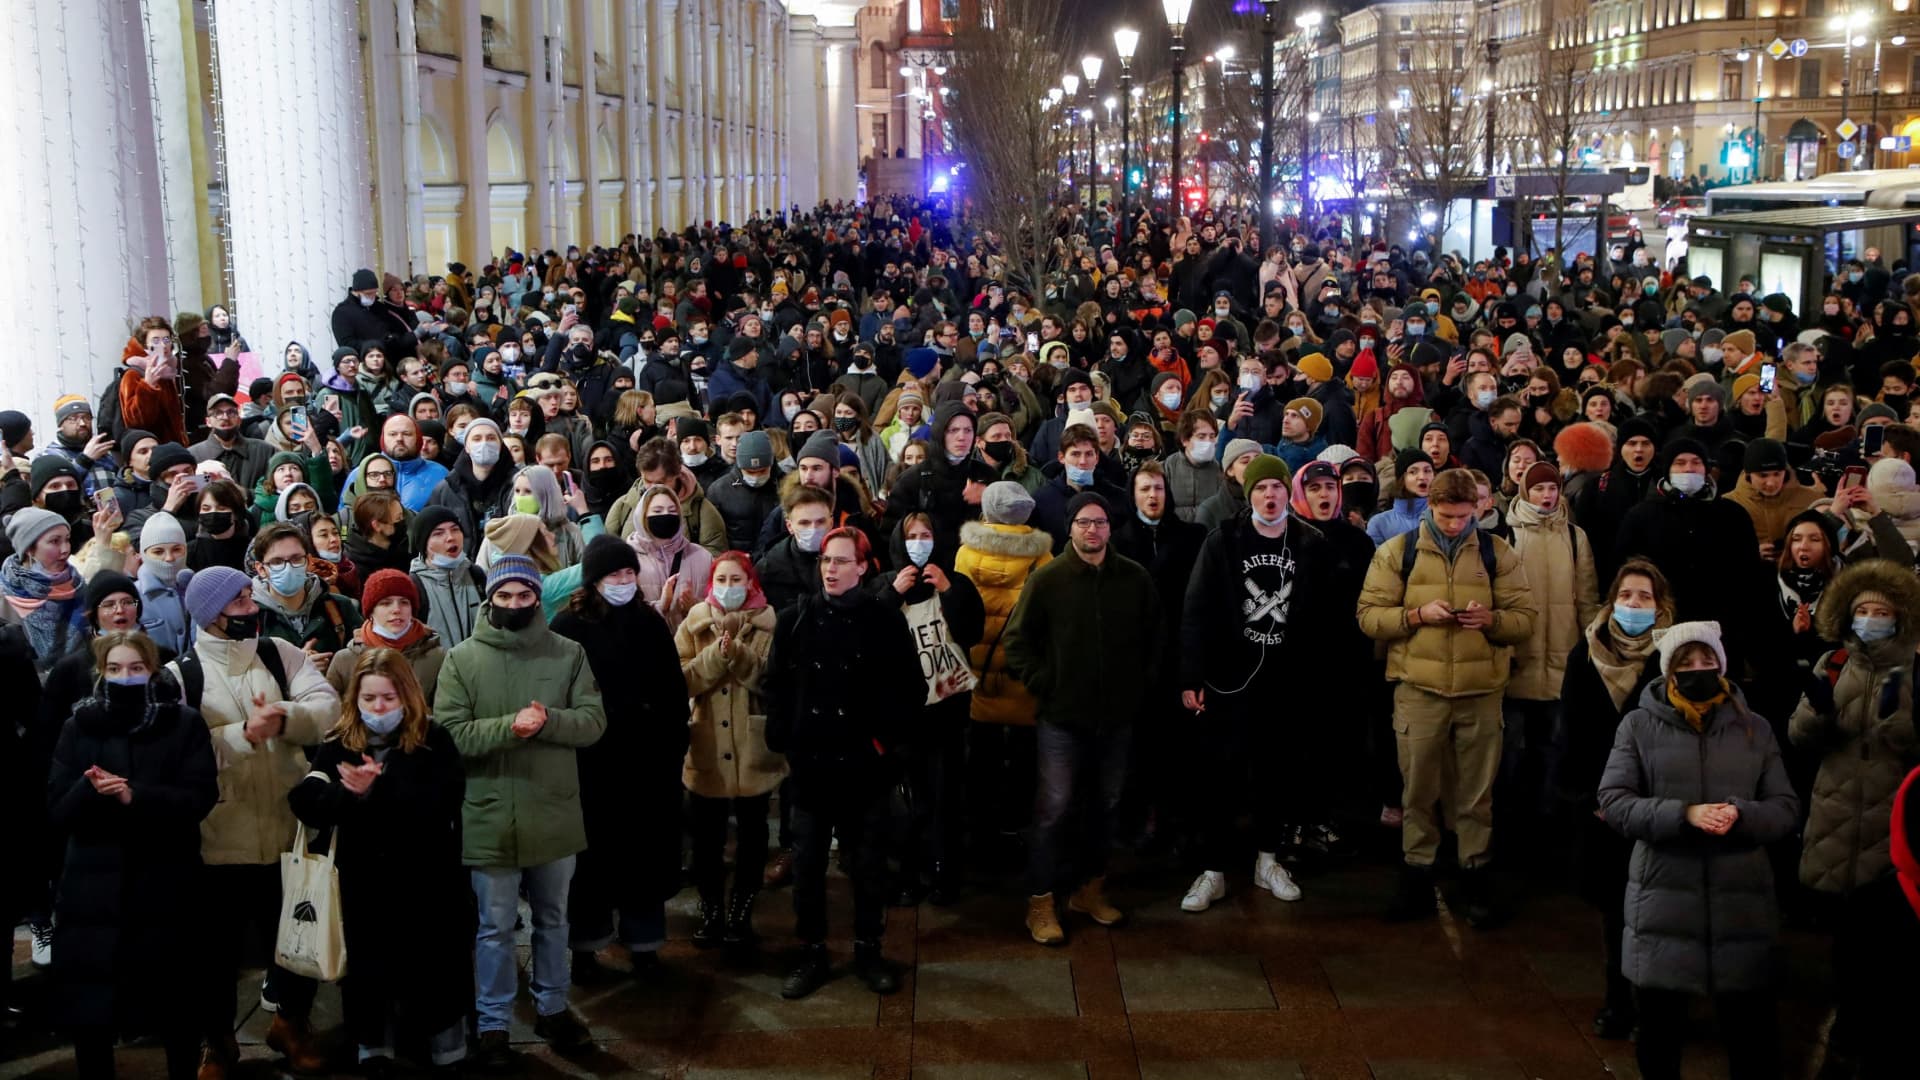 People attend an anti-war protest in Saint Petersburg, Russia, on Feb. 24, 2022, after Russian President Vladimir Putin authorized a military operation in Ukraine.